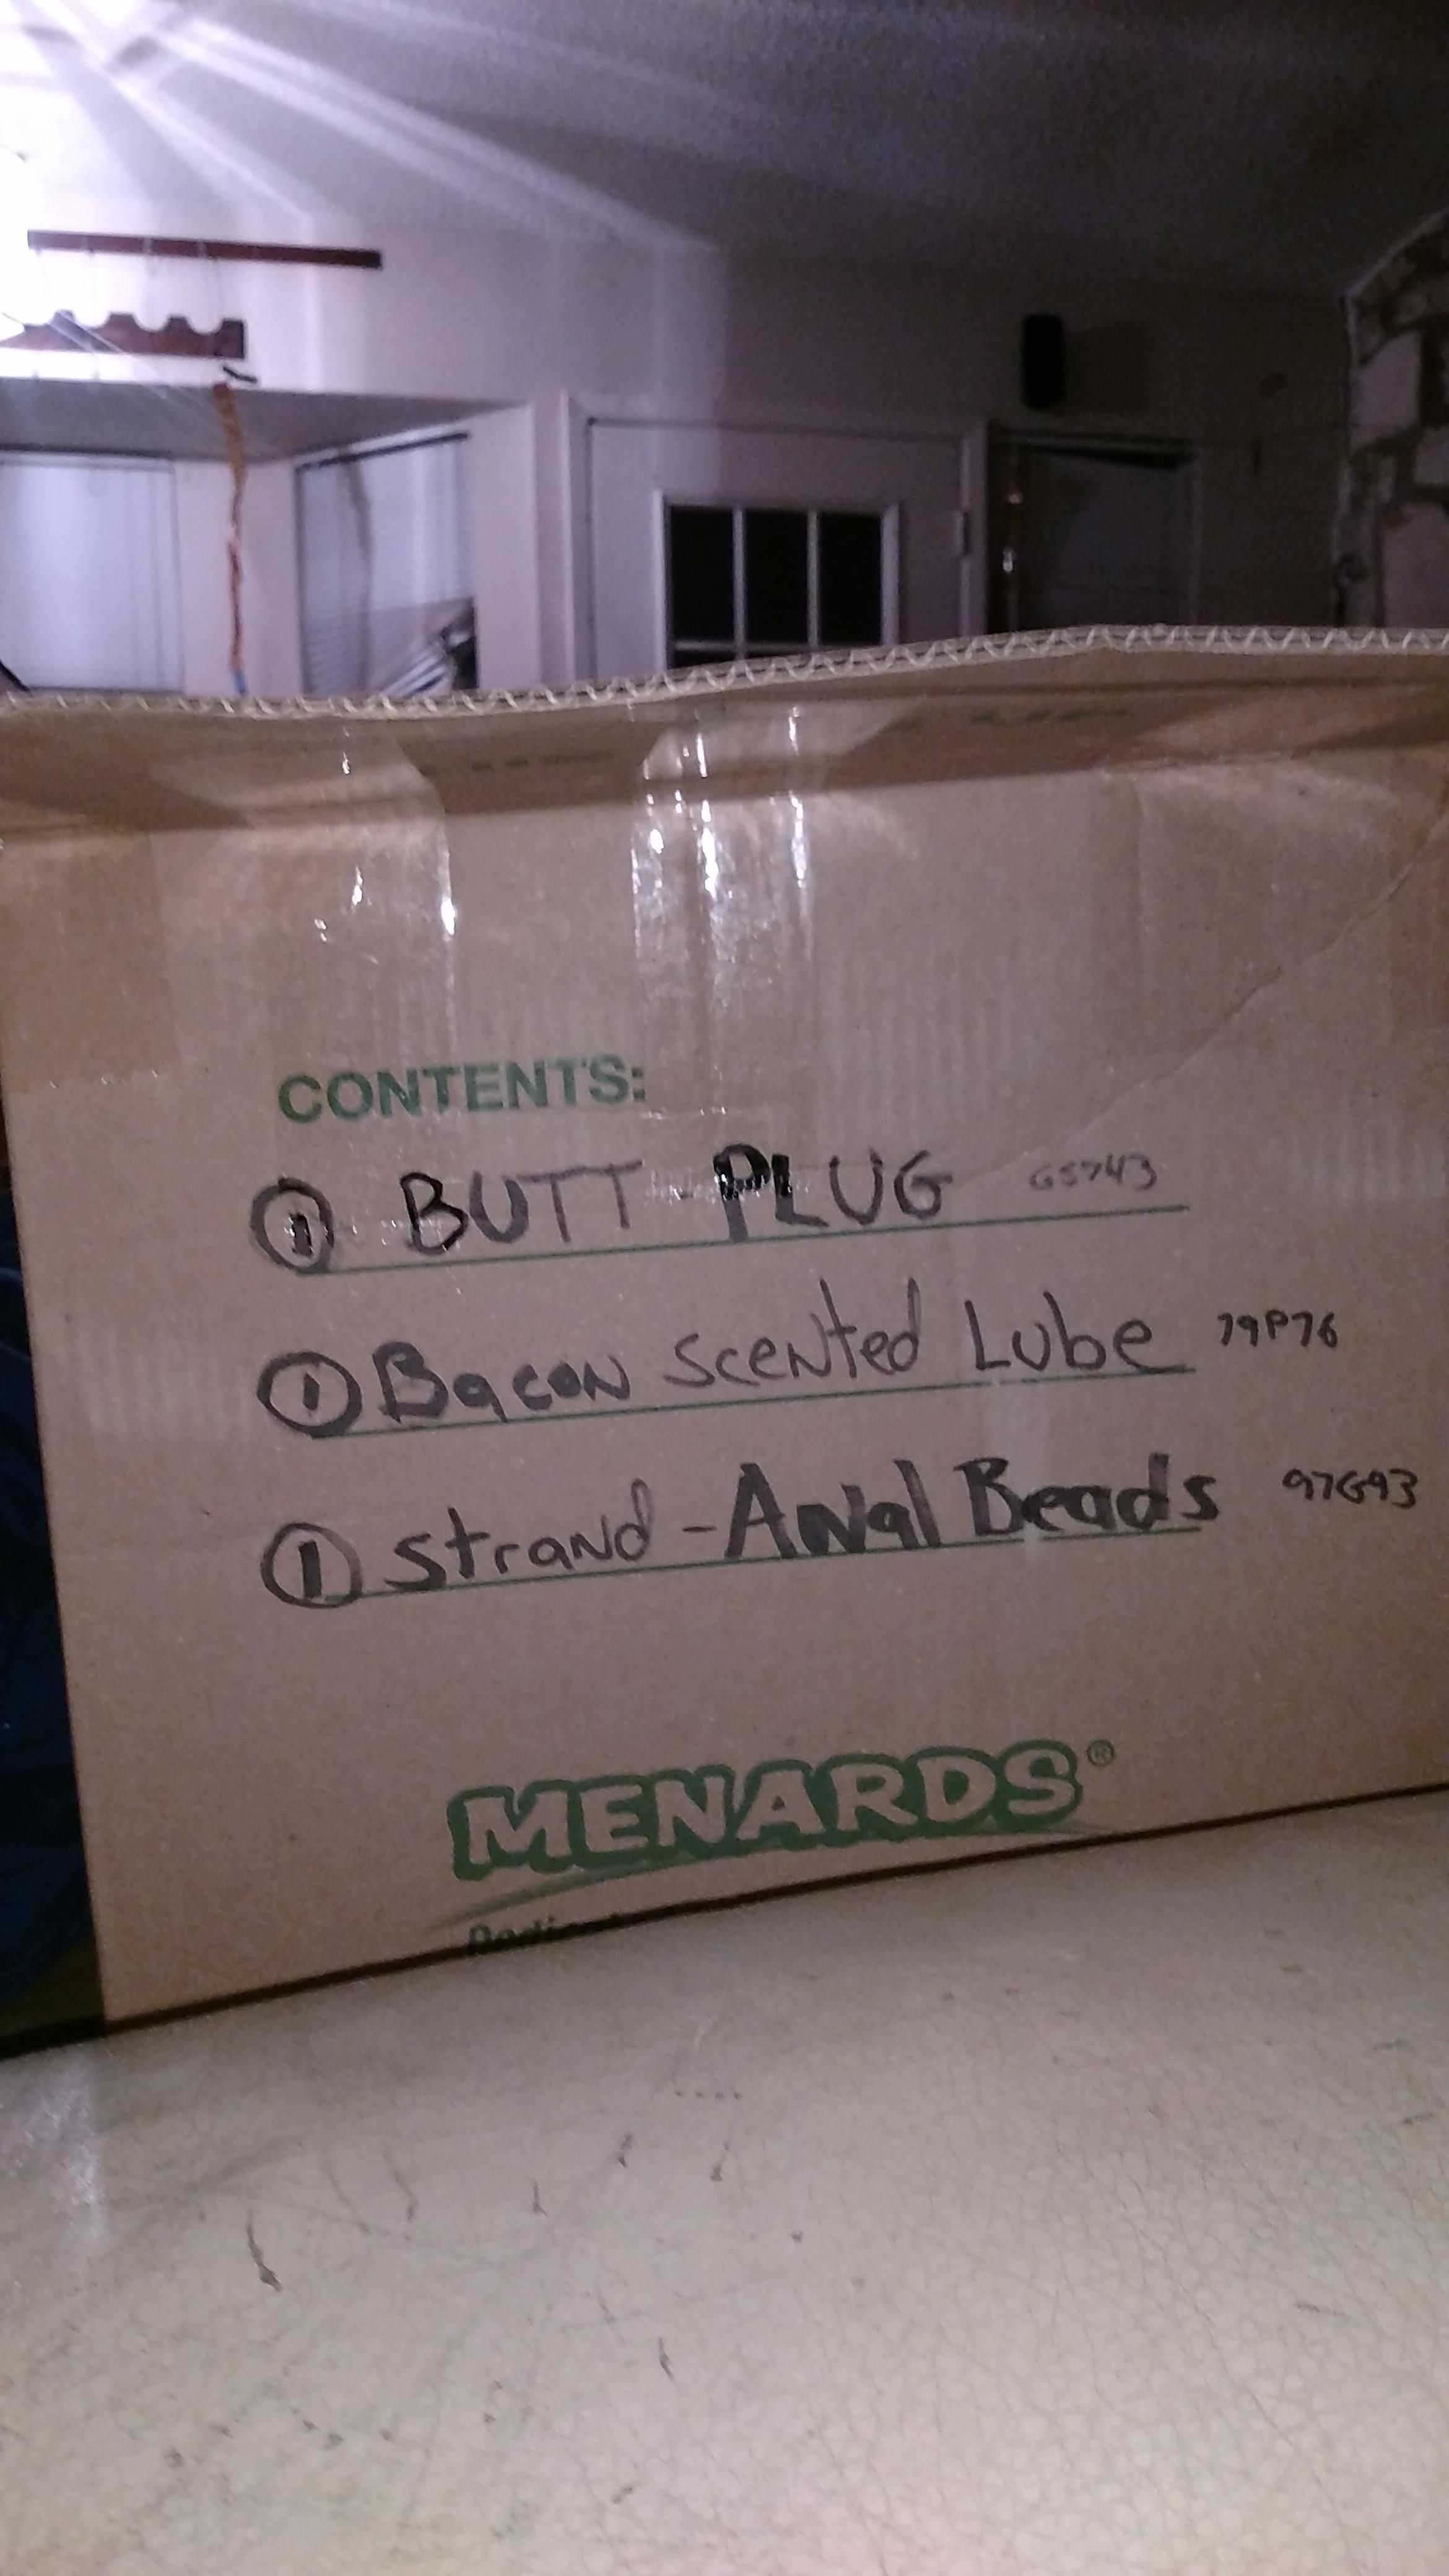 My roommate bought a saddle for his motorcycle on eBay. This was written on the box. Bravo ebay seller.